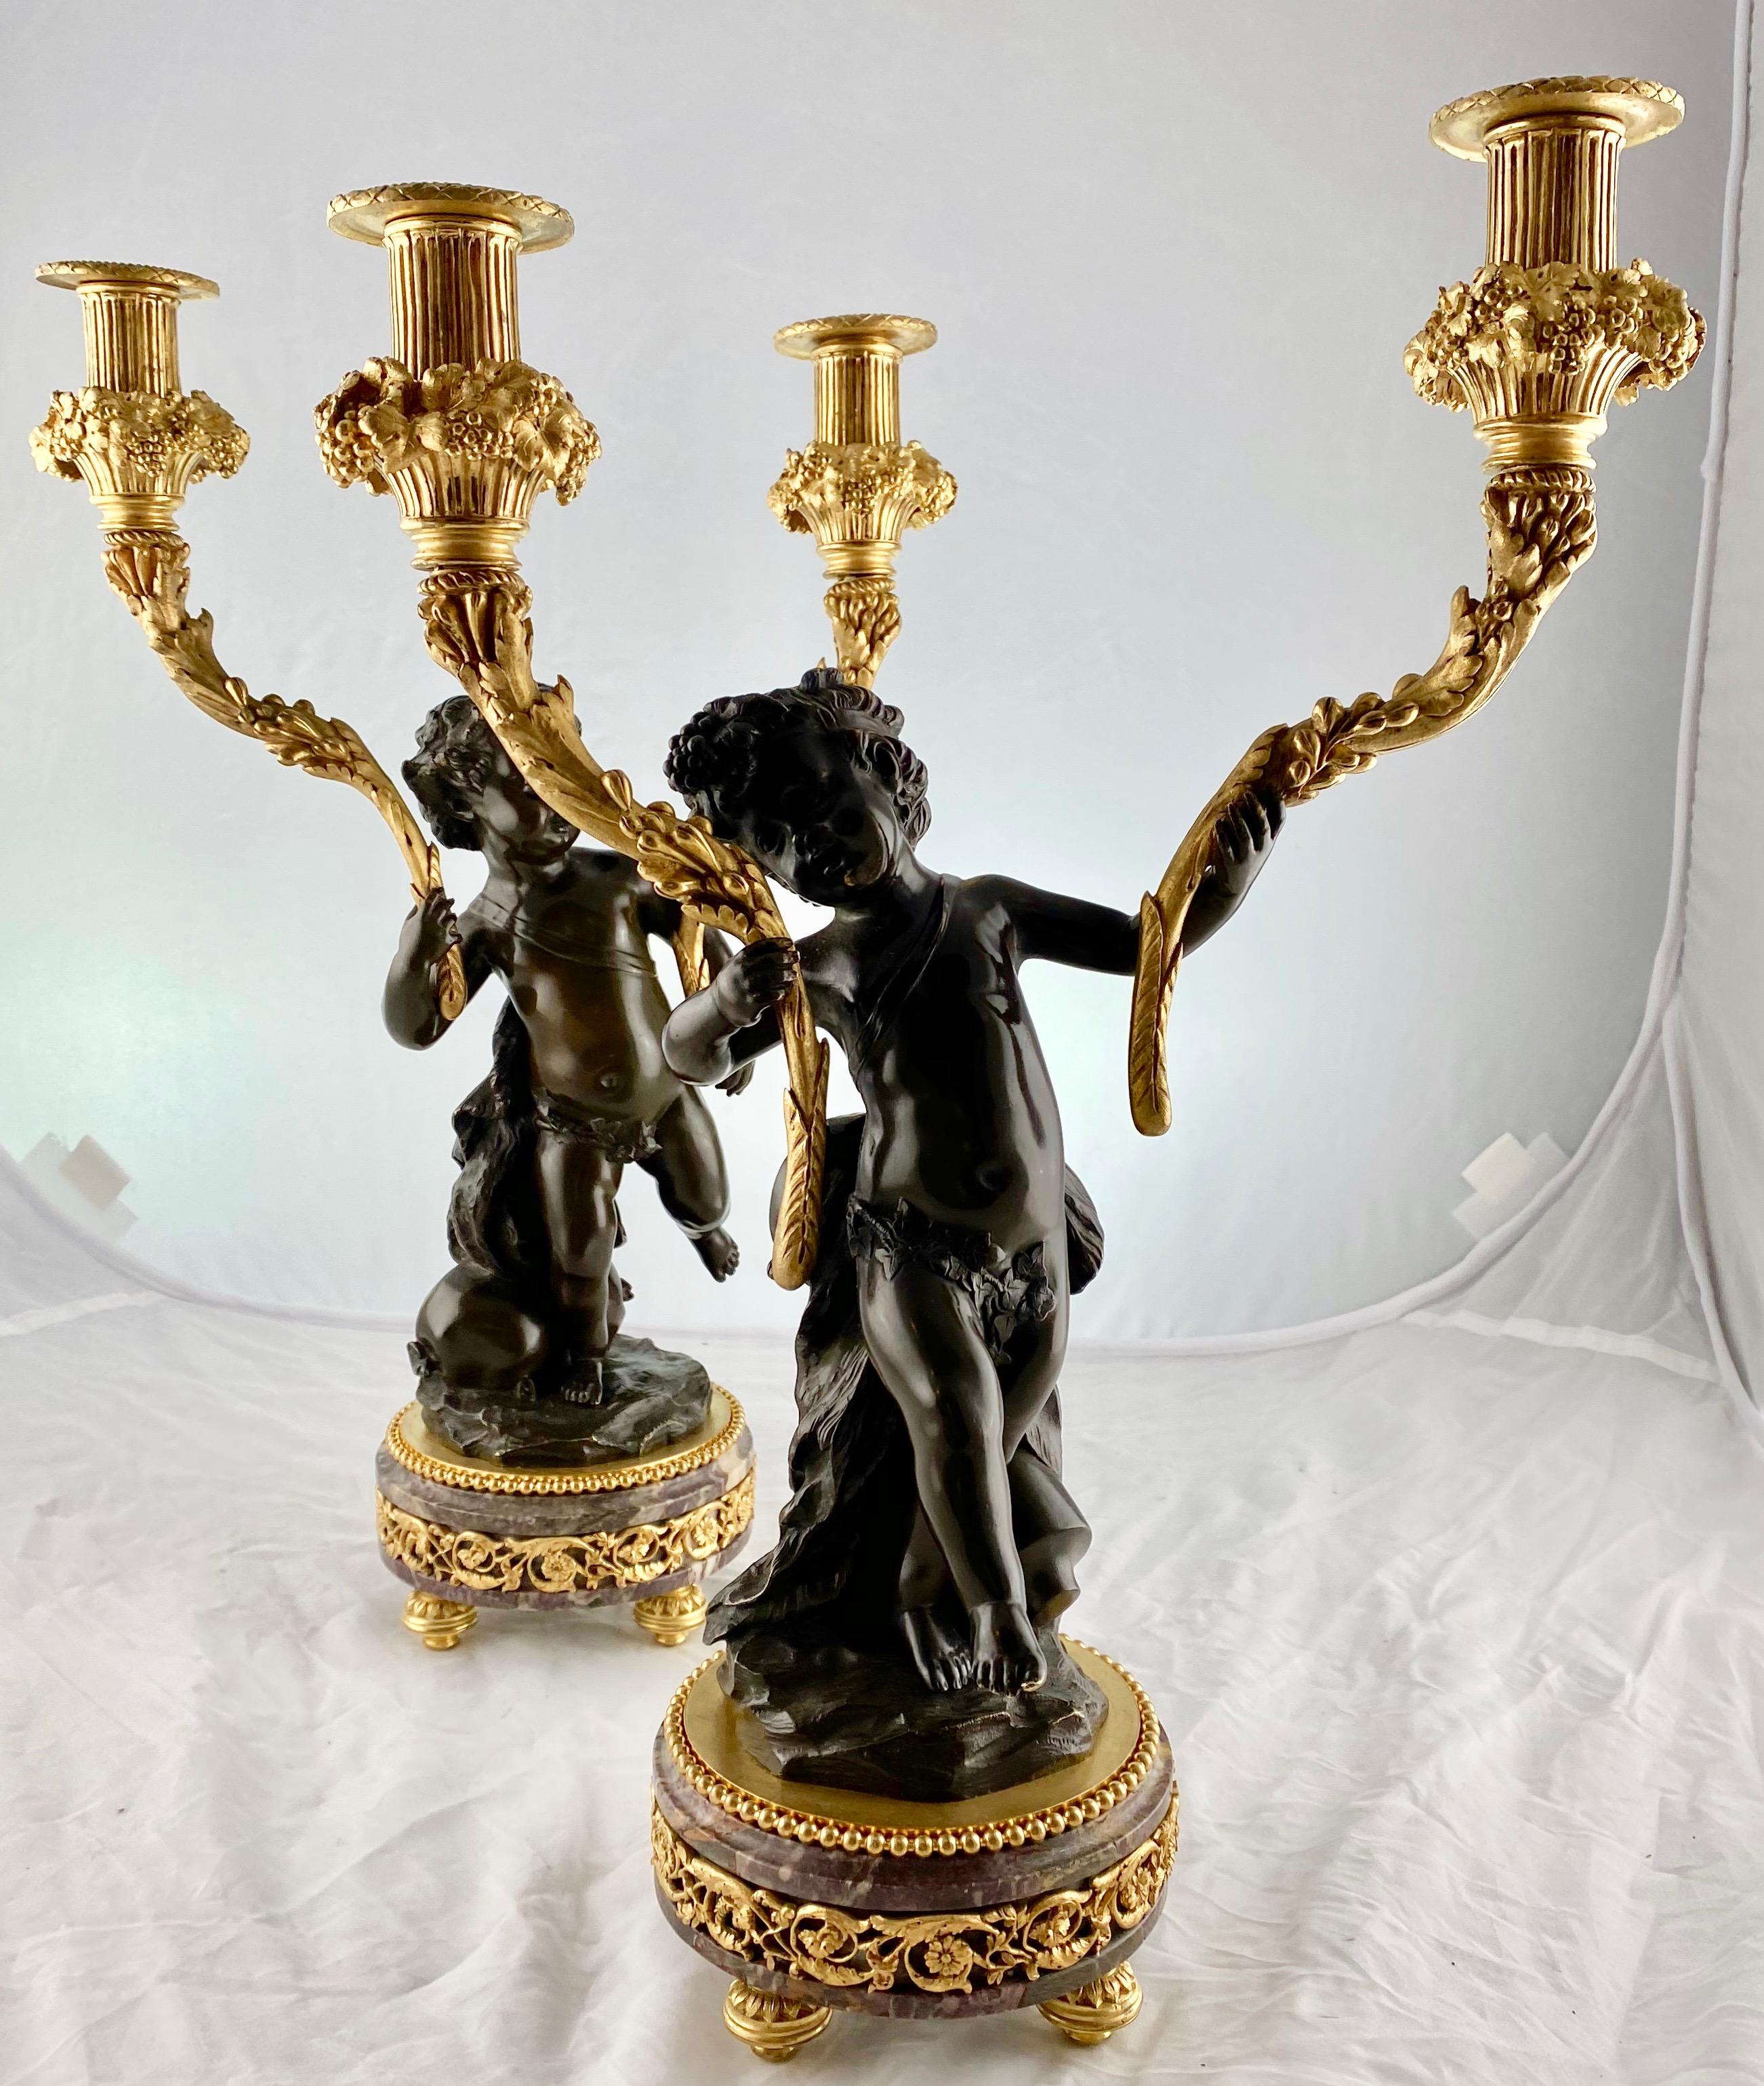 A pair of happy candelabra, French from the late 18th. The candelabra are depicting putti dancing around, one standing on a sack of wine the other with a wine amphora and a musical instrument on his back.
Dark patinated and gilt bronze with bases